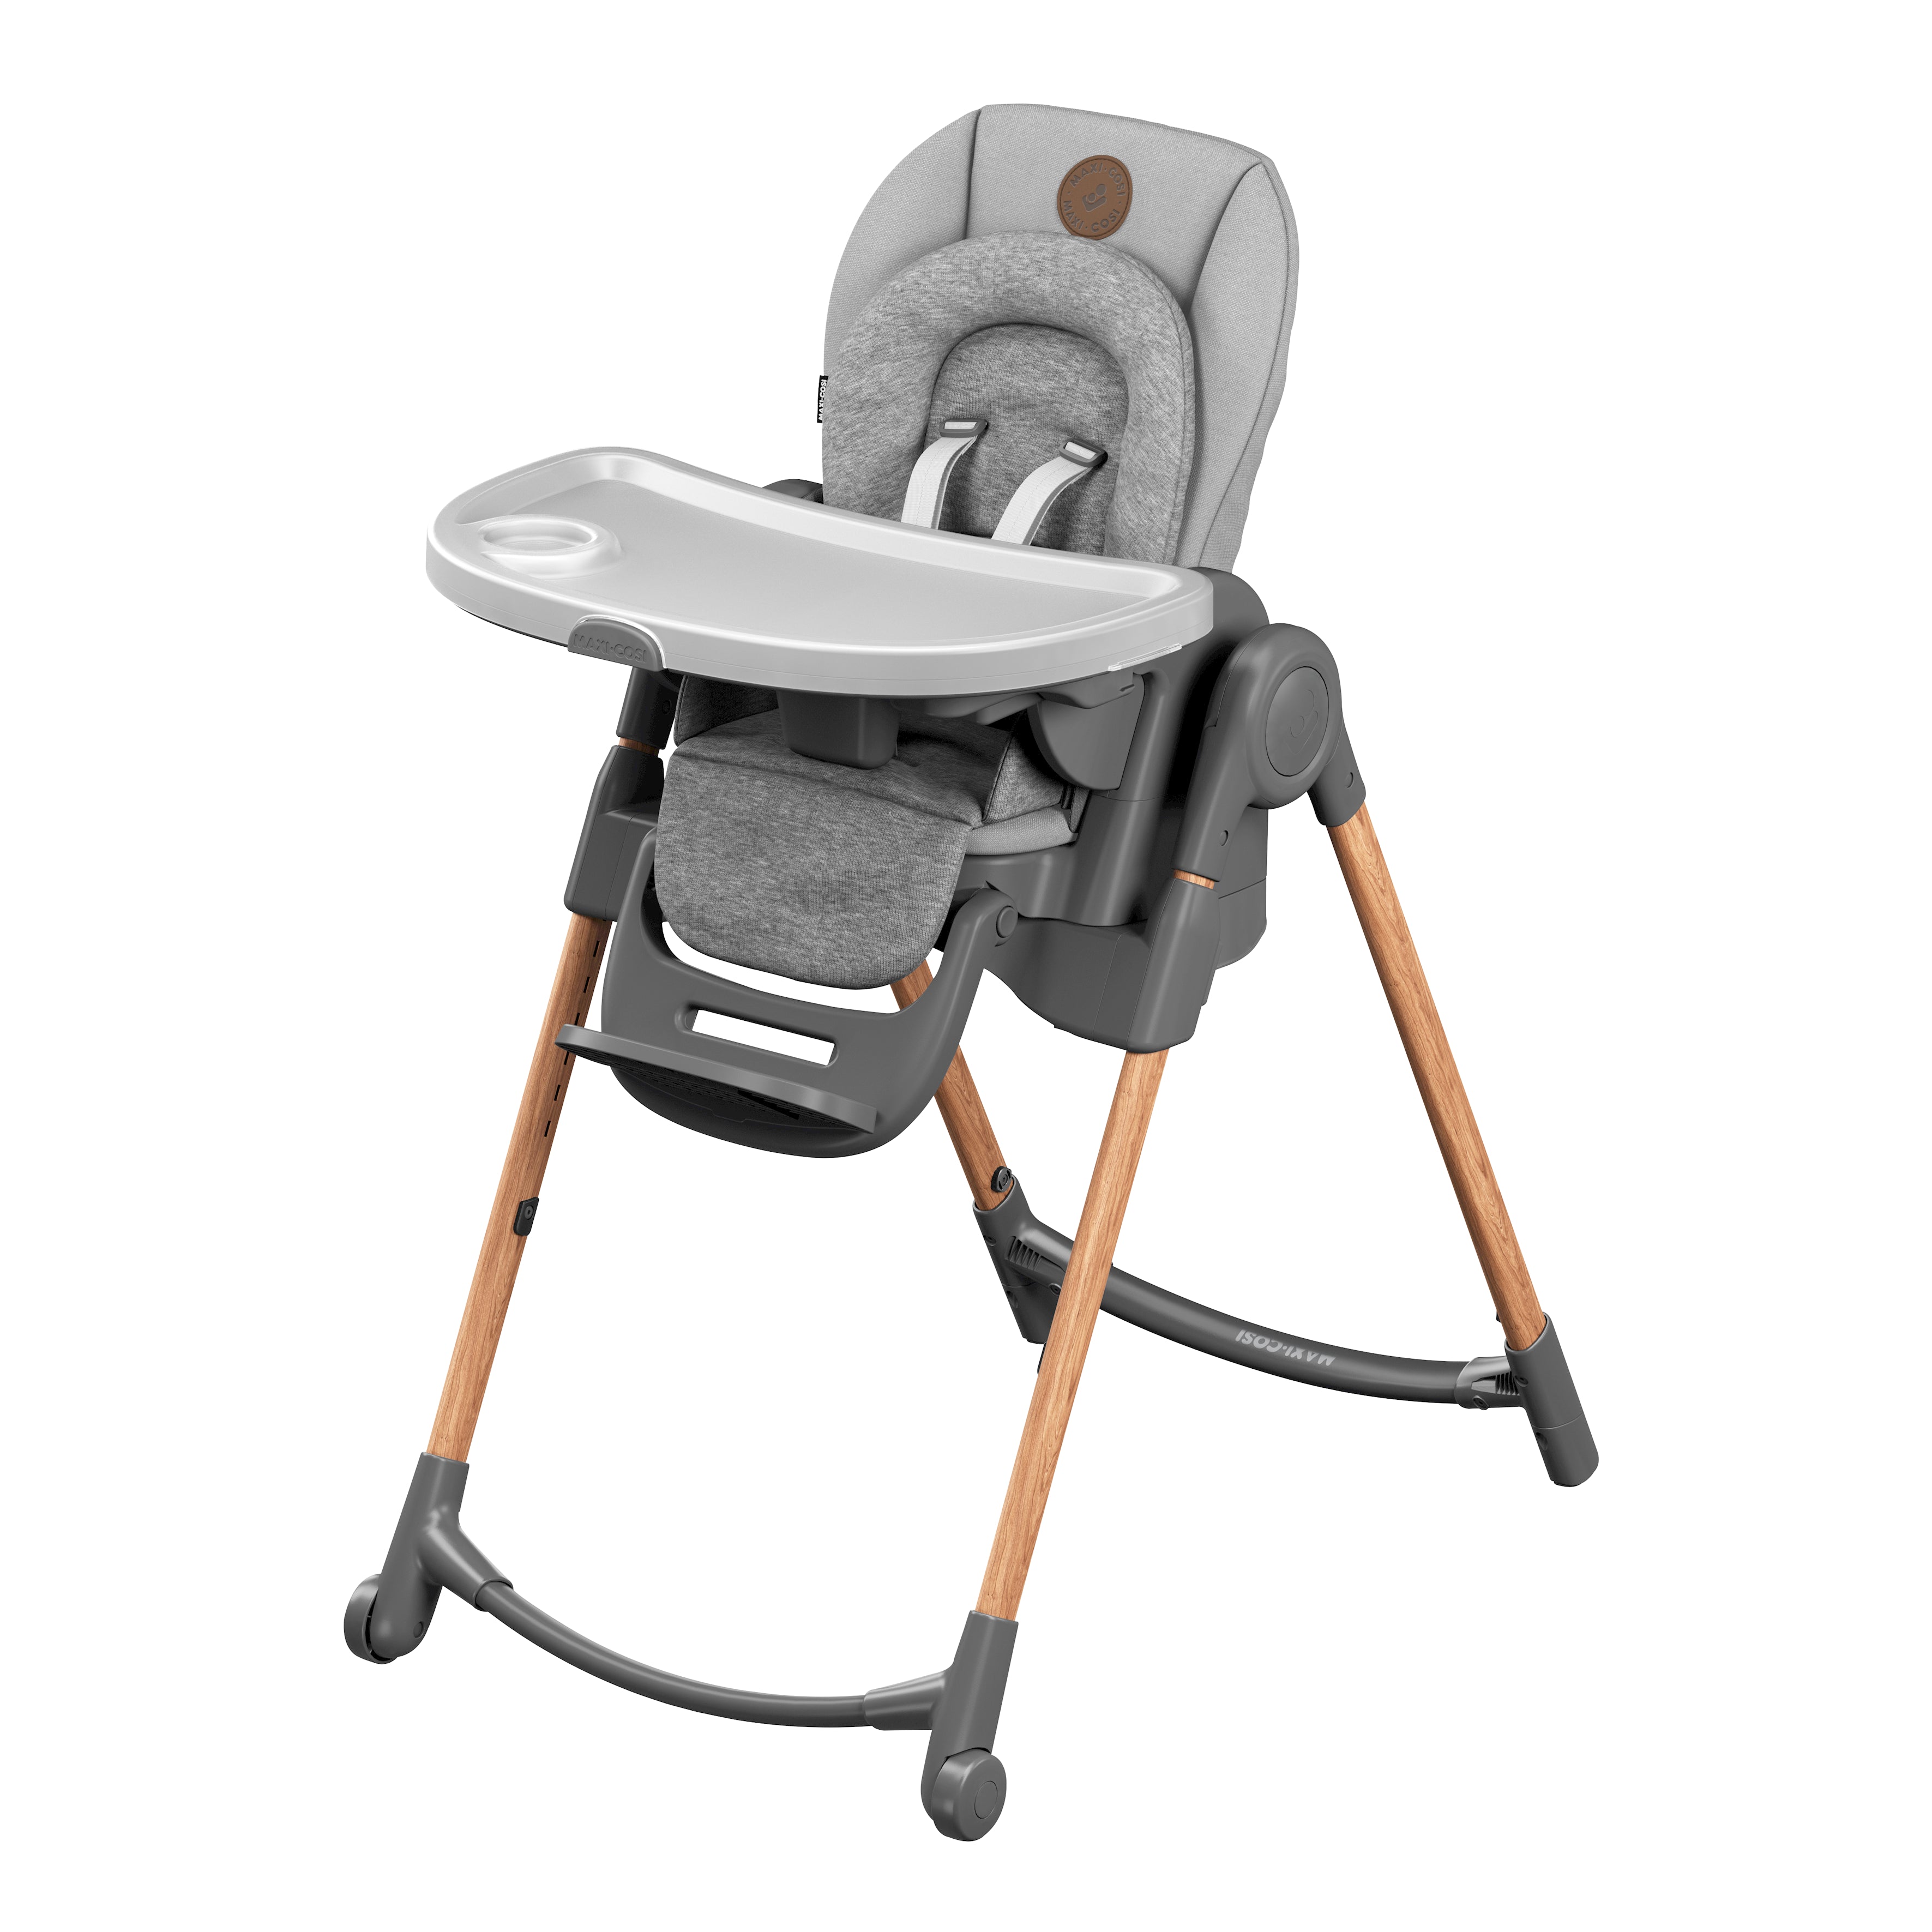 Maxi-Cosi 6-in-1 Minla High Chair - Essential Grey/Essential Graphite (Online Exclusive)